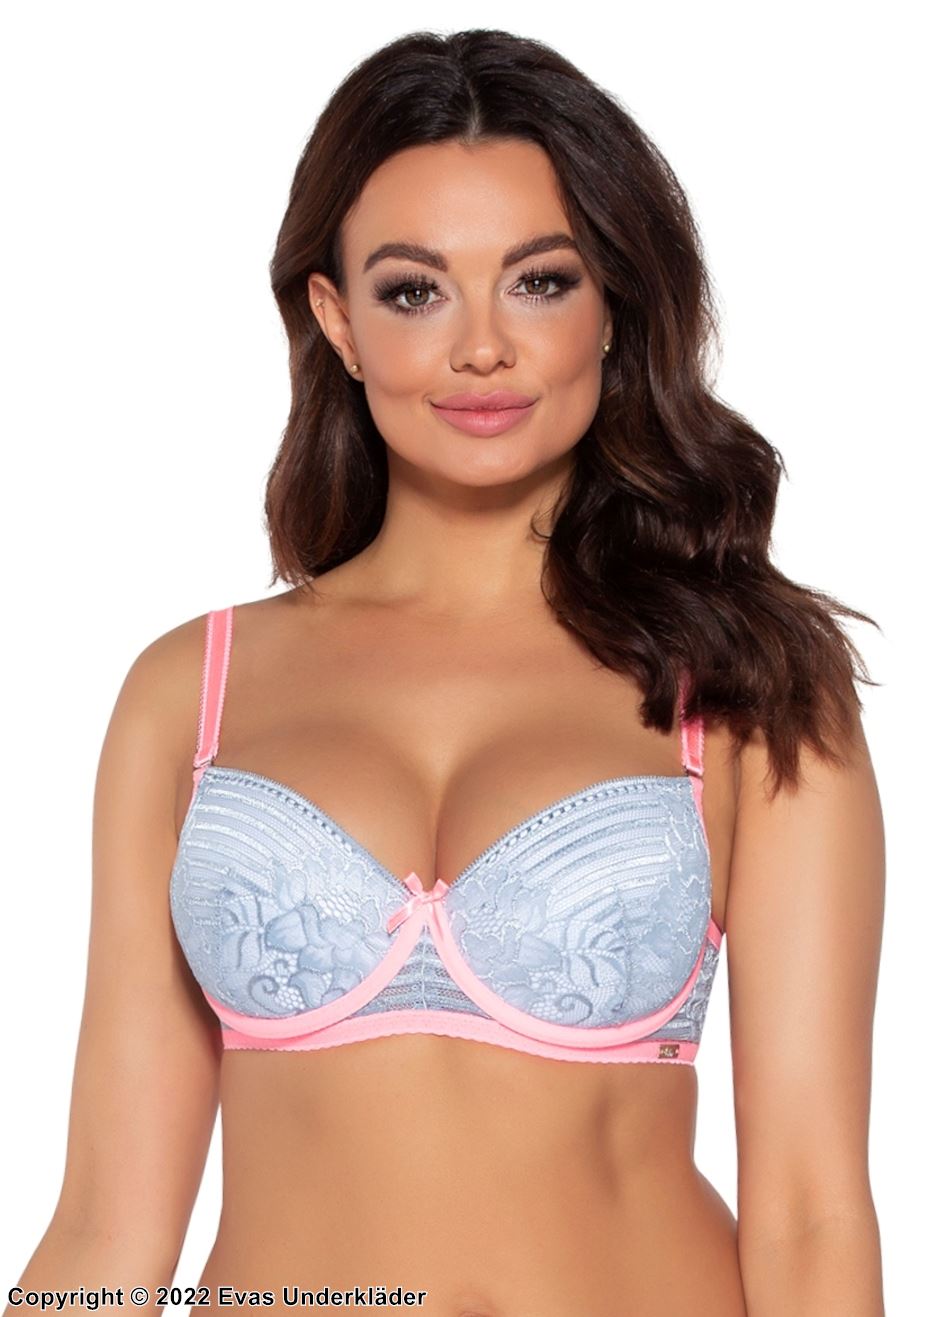 Exclusive push-up bra, floral lace, cheerful colors